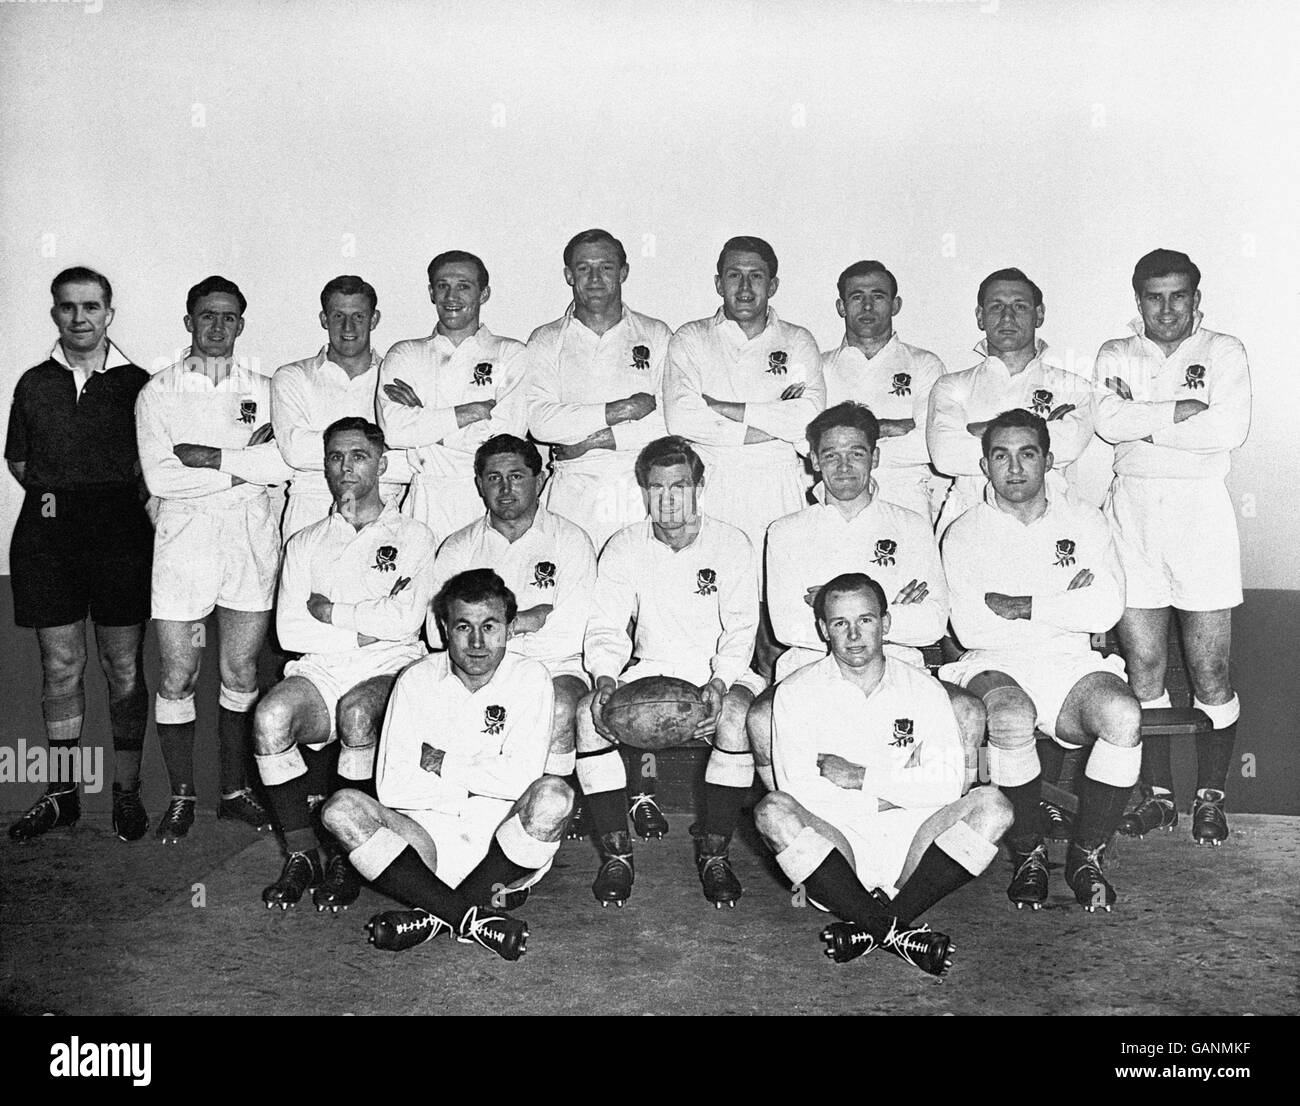 England Team Group (Back Row l-r) R. Mitchell (Referee), Jeff Butterfield, William Davies, Peter Thompson, David Marques, Muscles Currie, Peter Robbins, Ron Jacobs, Bob Challis. (Mittlere Reihe l-r) Peter Jackson, George Hastings, Eric Evans, Ned Ashcroft, Reg Higgins. (SA l-r) Ricky Bartlett, Dickie Jeeps. Stockfoto